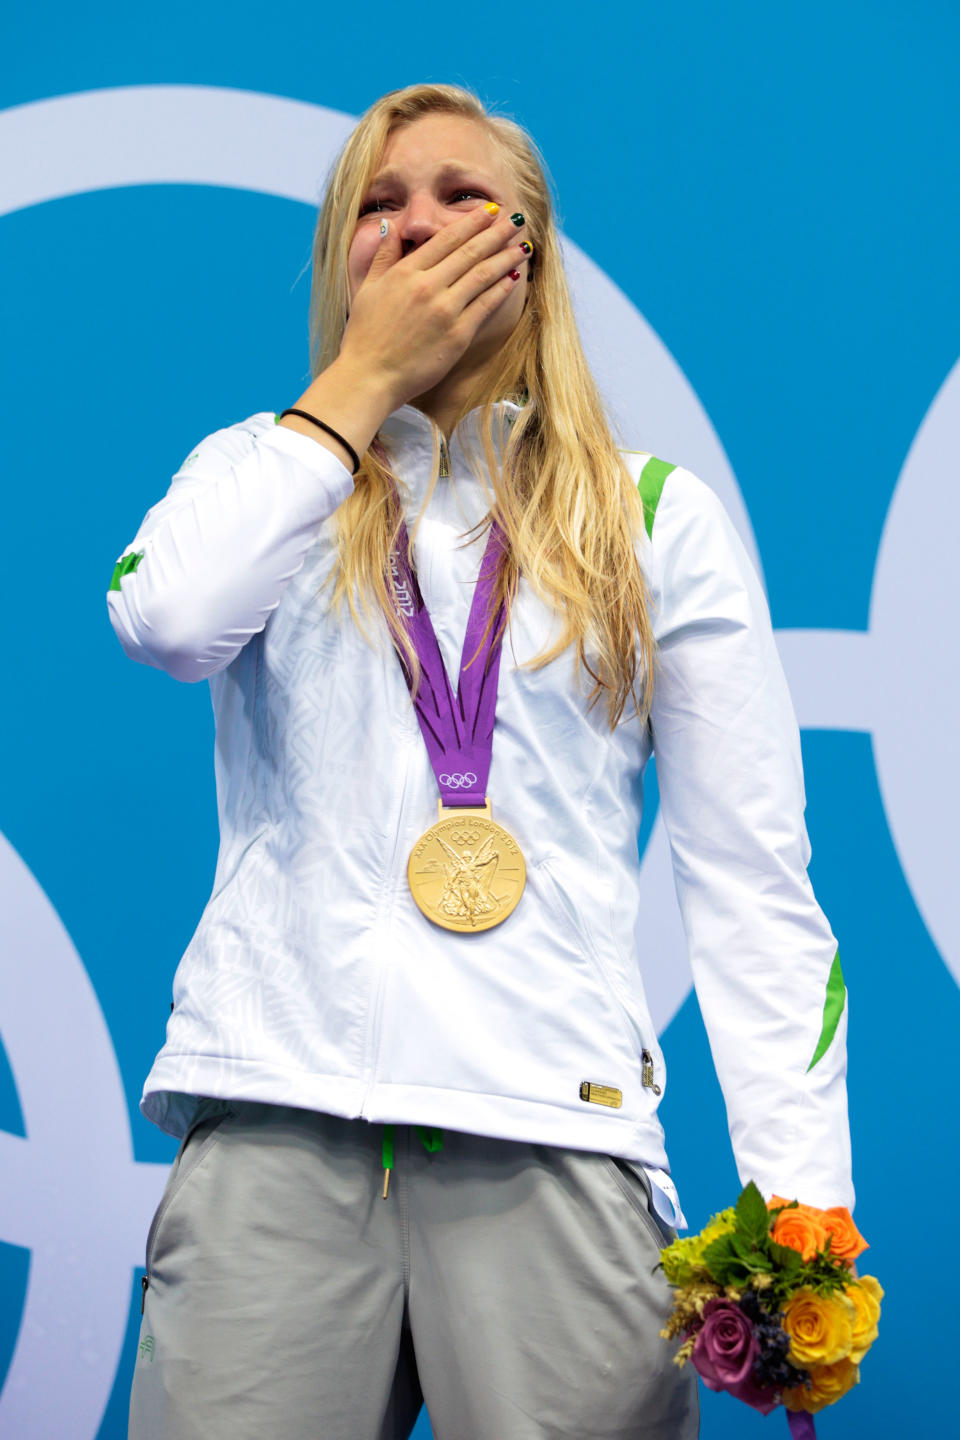 LONDON, ENGLAND - JULY 30: Ruta Meilutyte of Lithuania reacts as she receives her gold medal during the medal ceremony for the Women's 100m Breaststroke on Day 3 of the London 2012 Olympic Games at the Aquatics Centre on July 30, 2012 in London, England. (Photo by Adam Pretty/Getty Images)